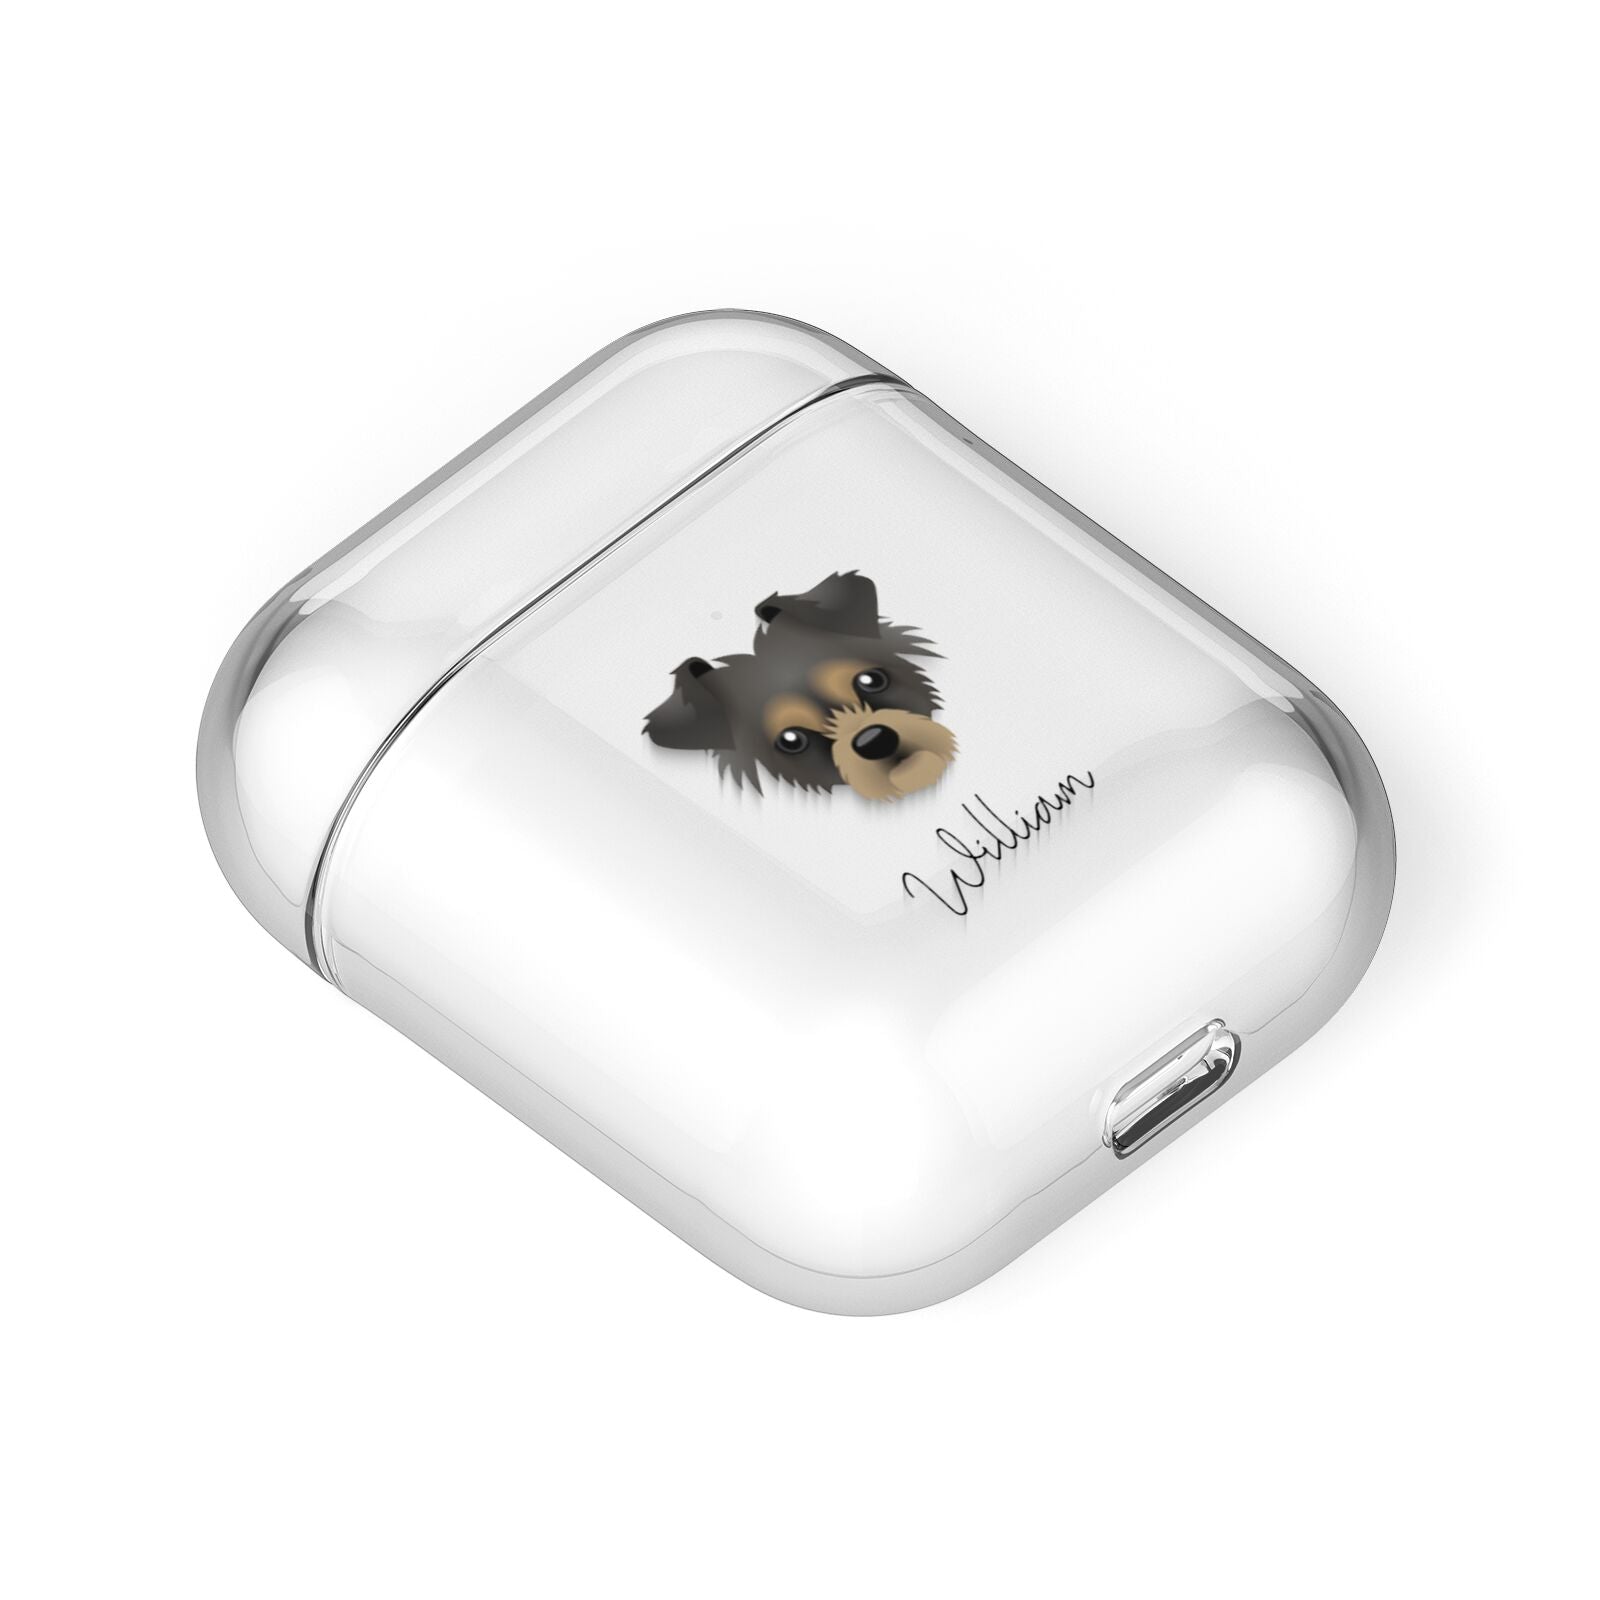 Chipoo Personalised AirPods Case Laid Flat